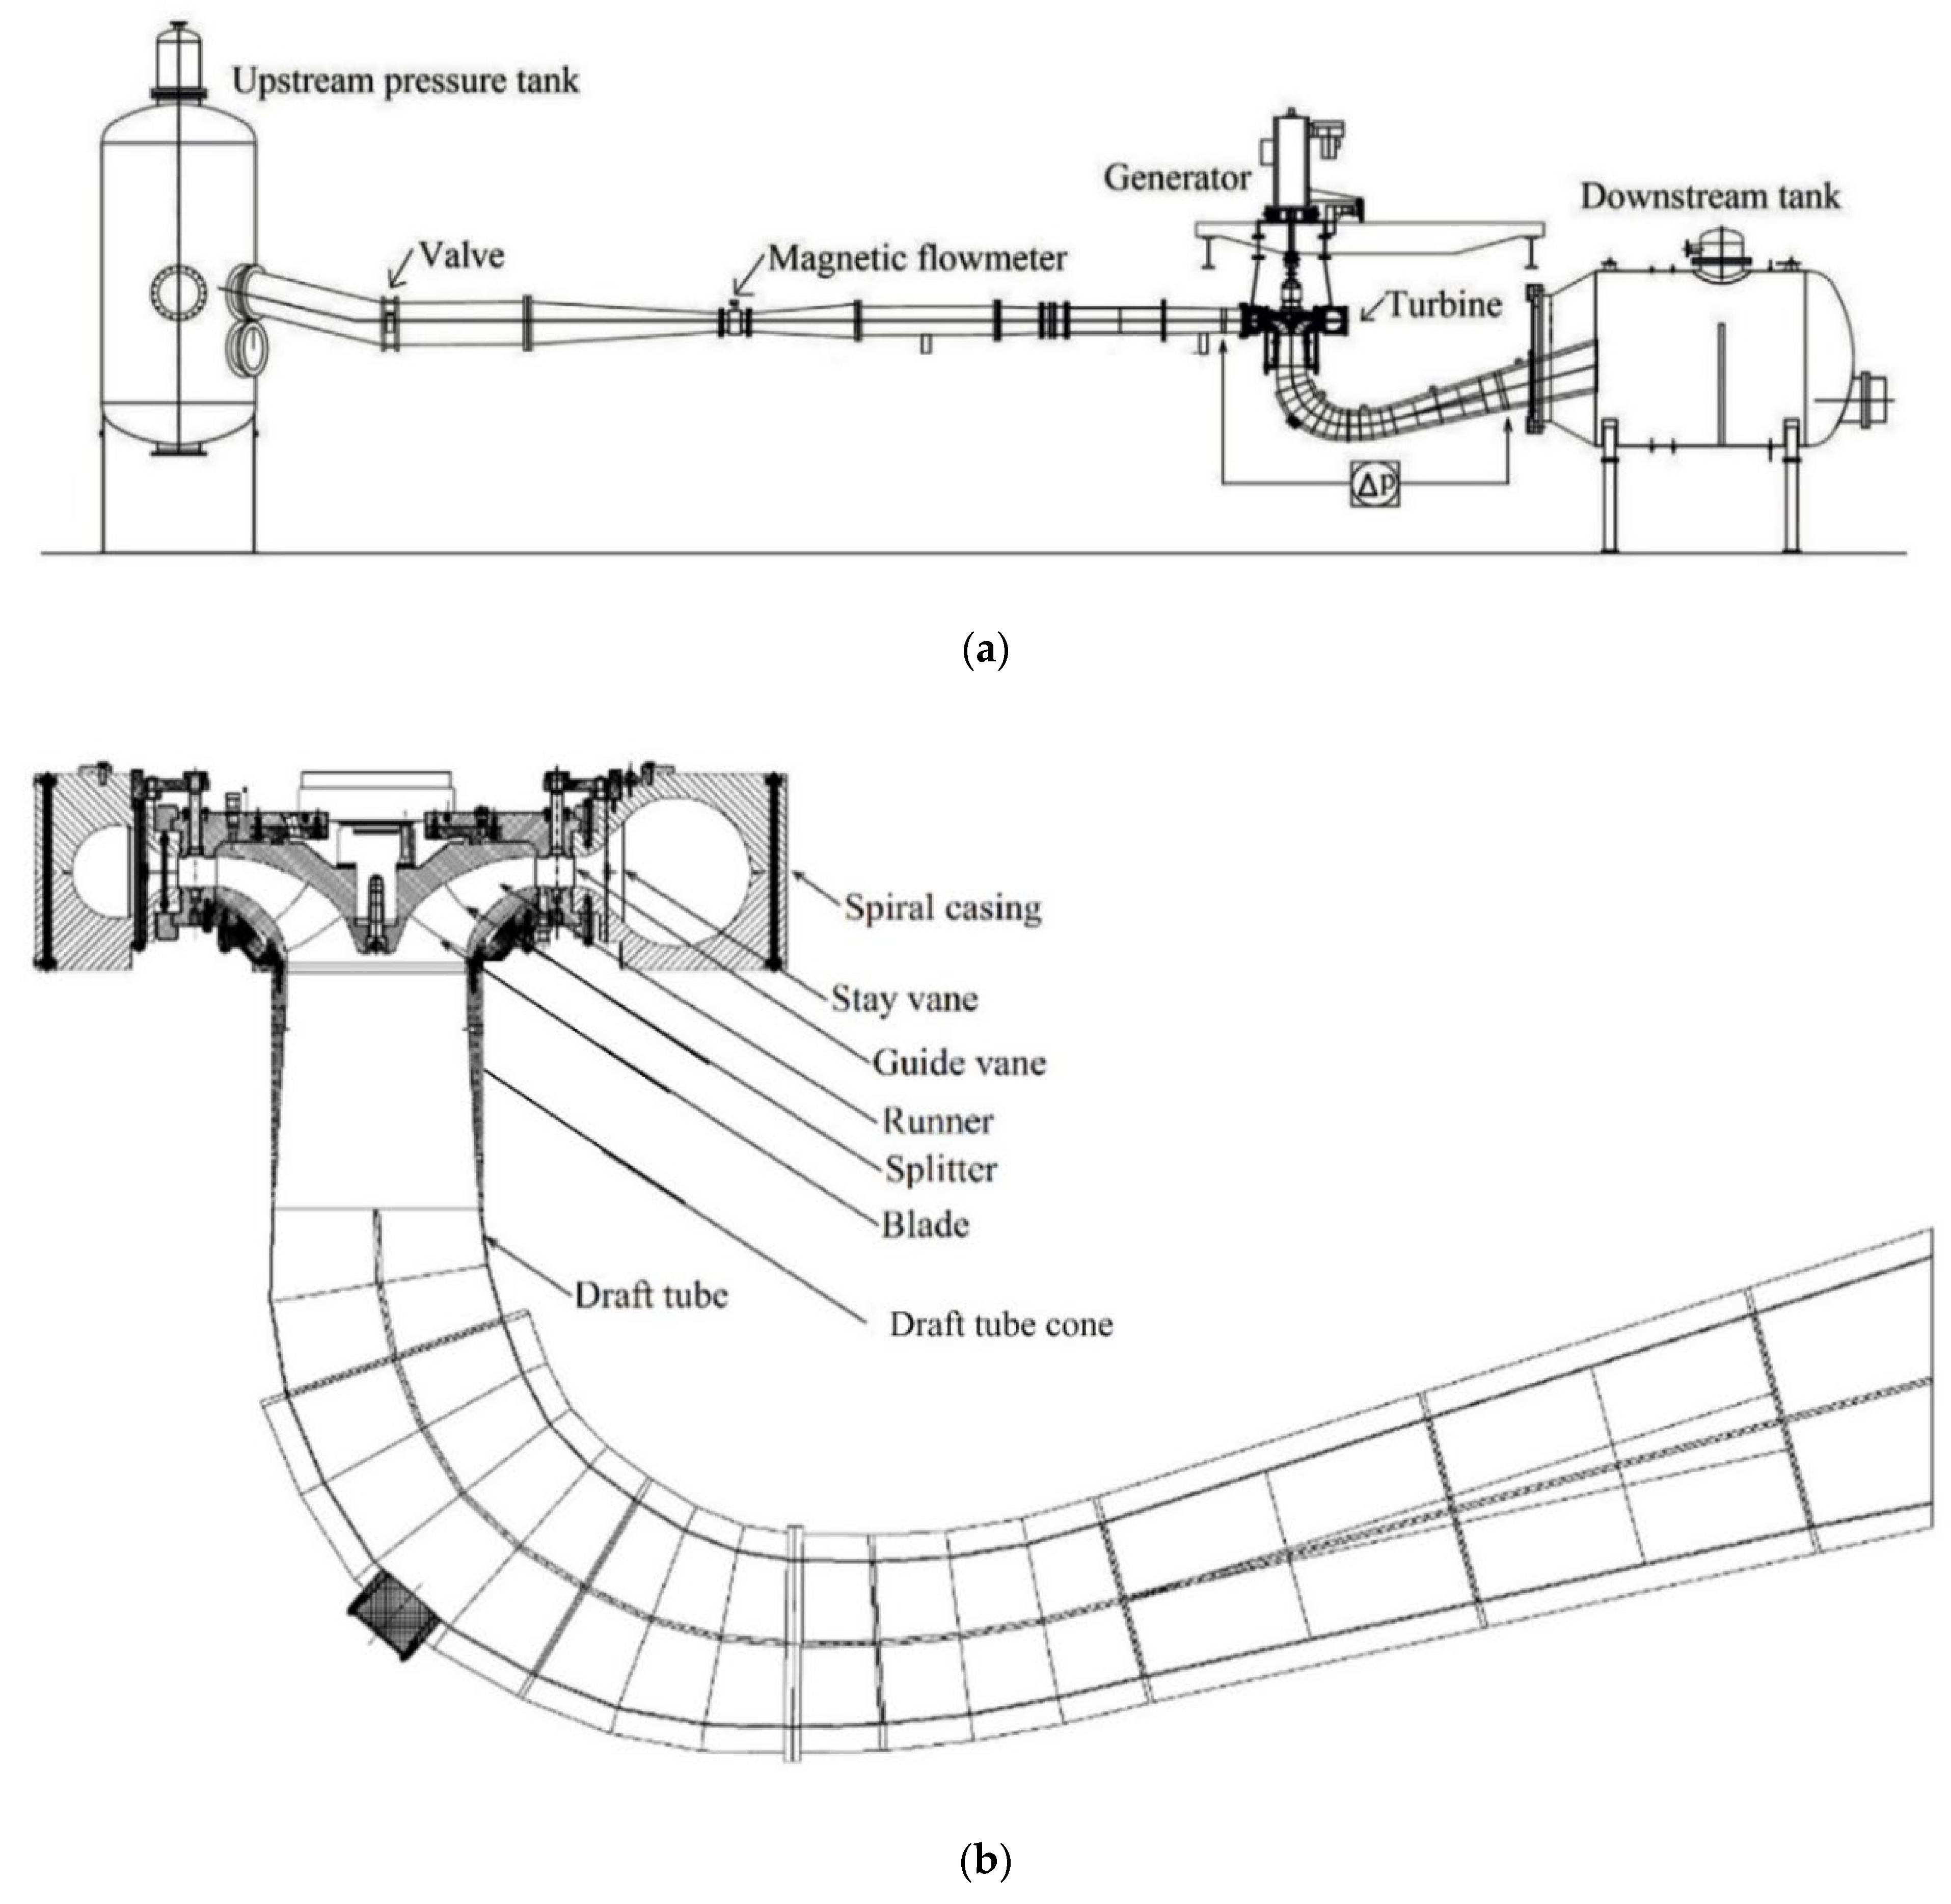 Energies | Free Full-Text | Hydraulic Performance of a Francis Turbine with  a Variable Draft Tube Guide Vane System to Mitigate Pressure Pulsations |  HTML